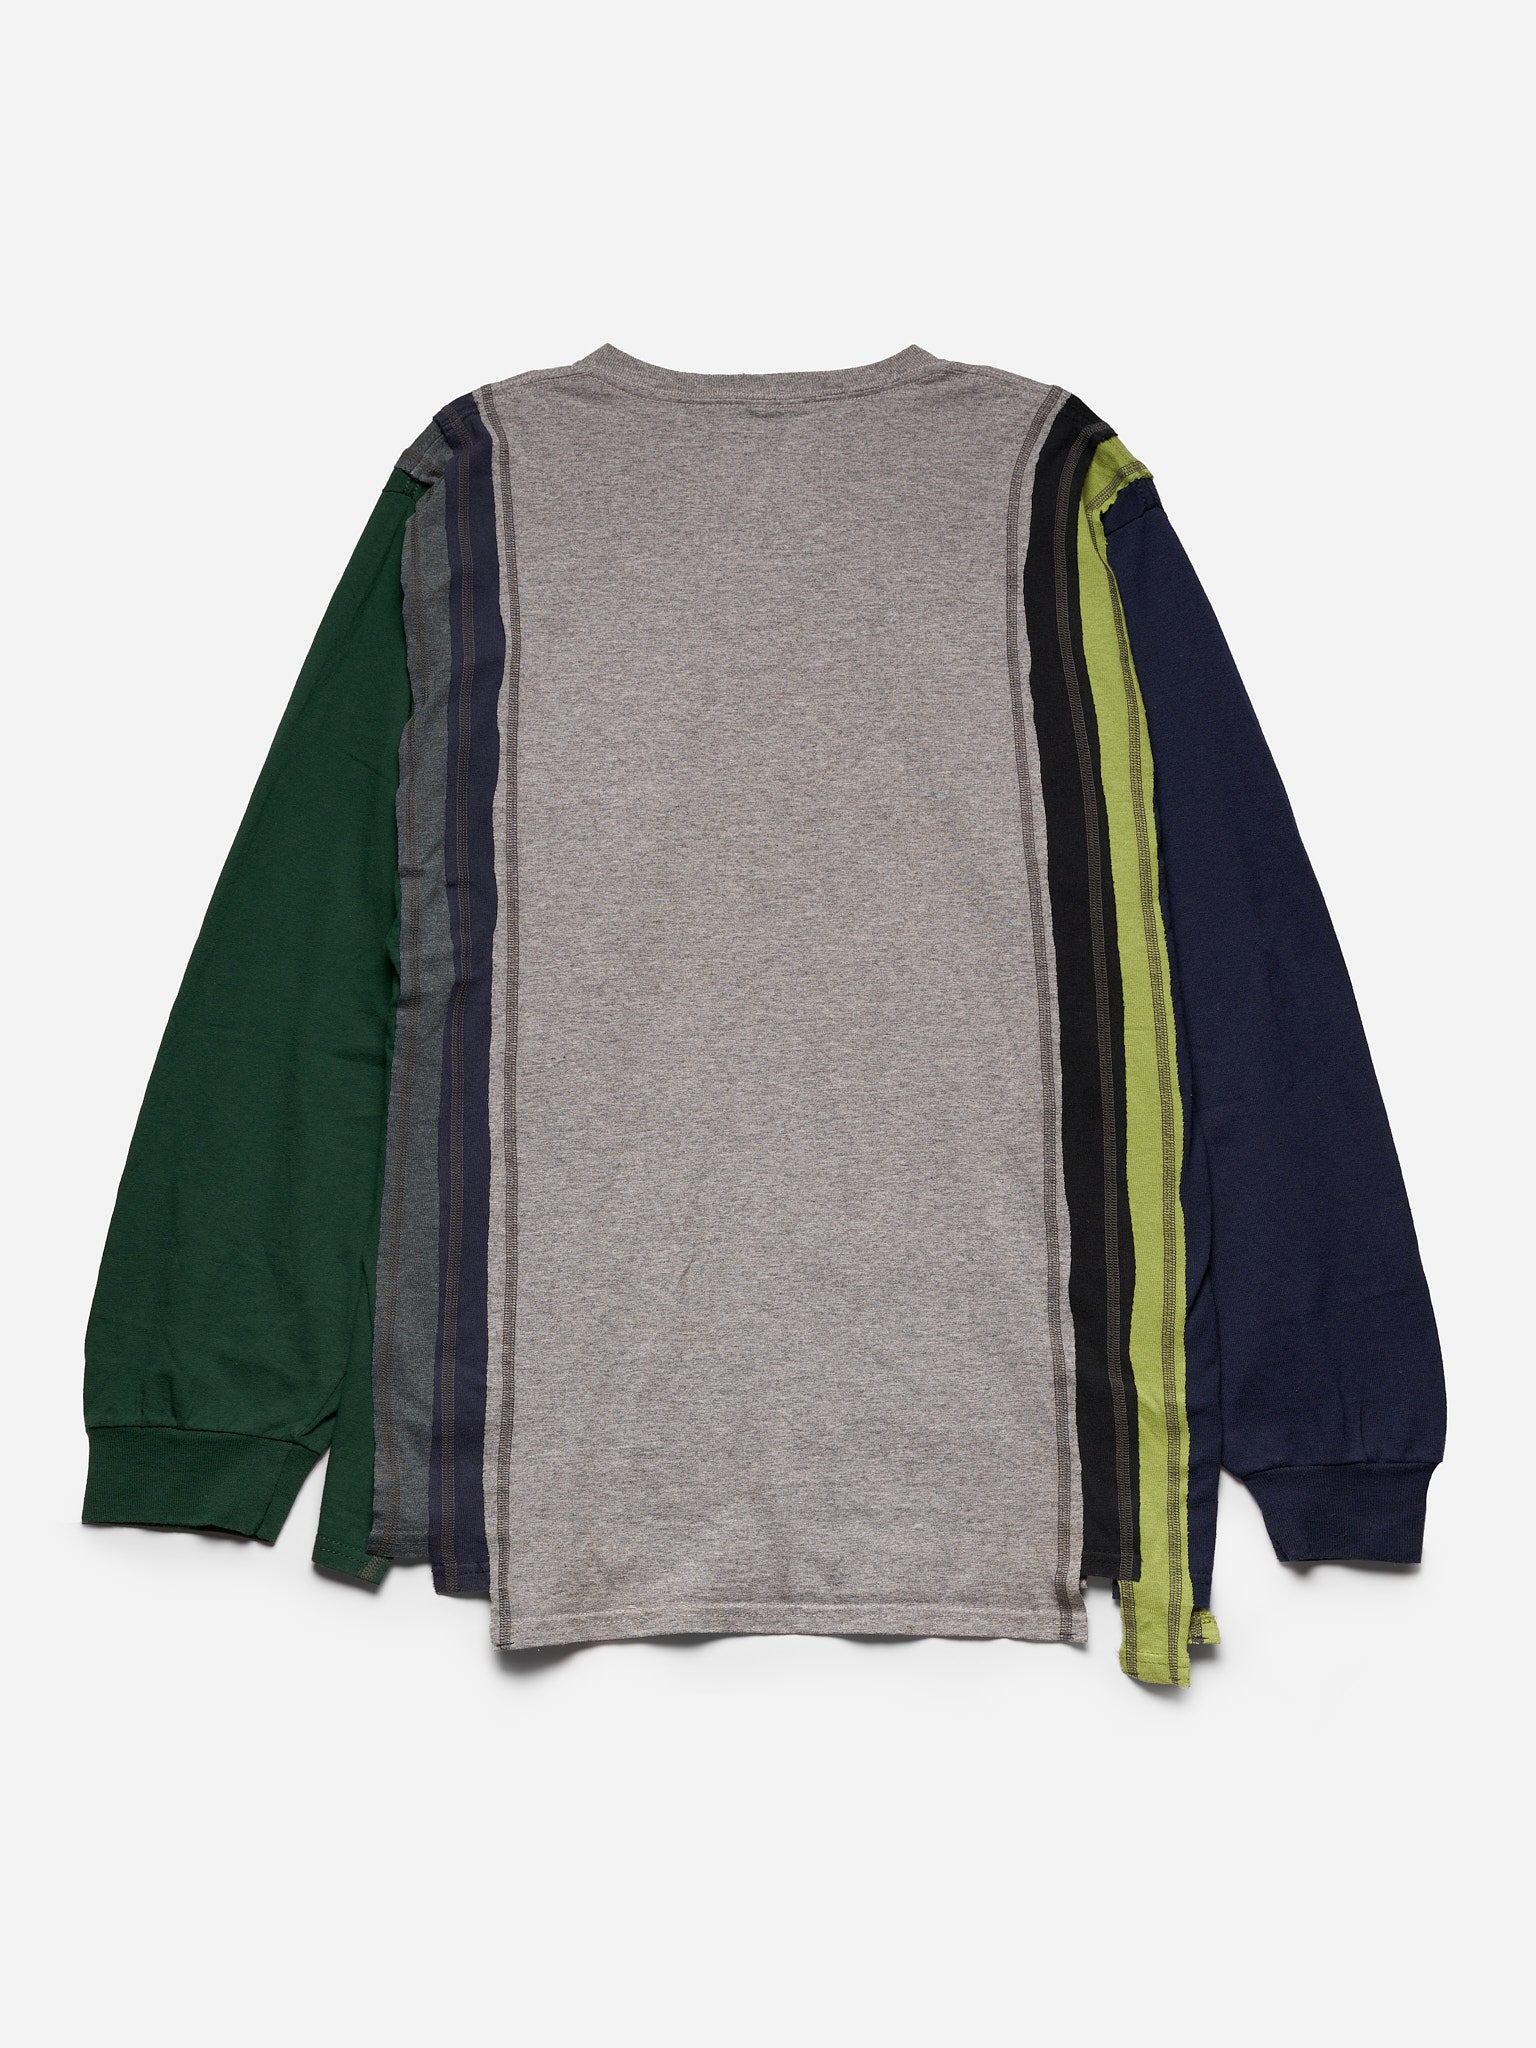 Rebuild by Needles 7 Cuts L/S Tee - College M – OALLERY